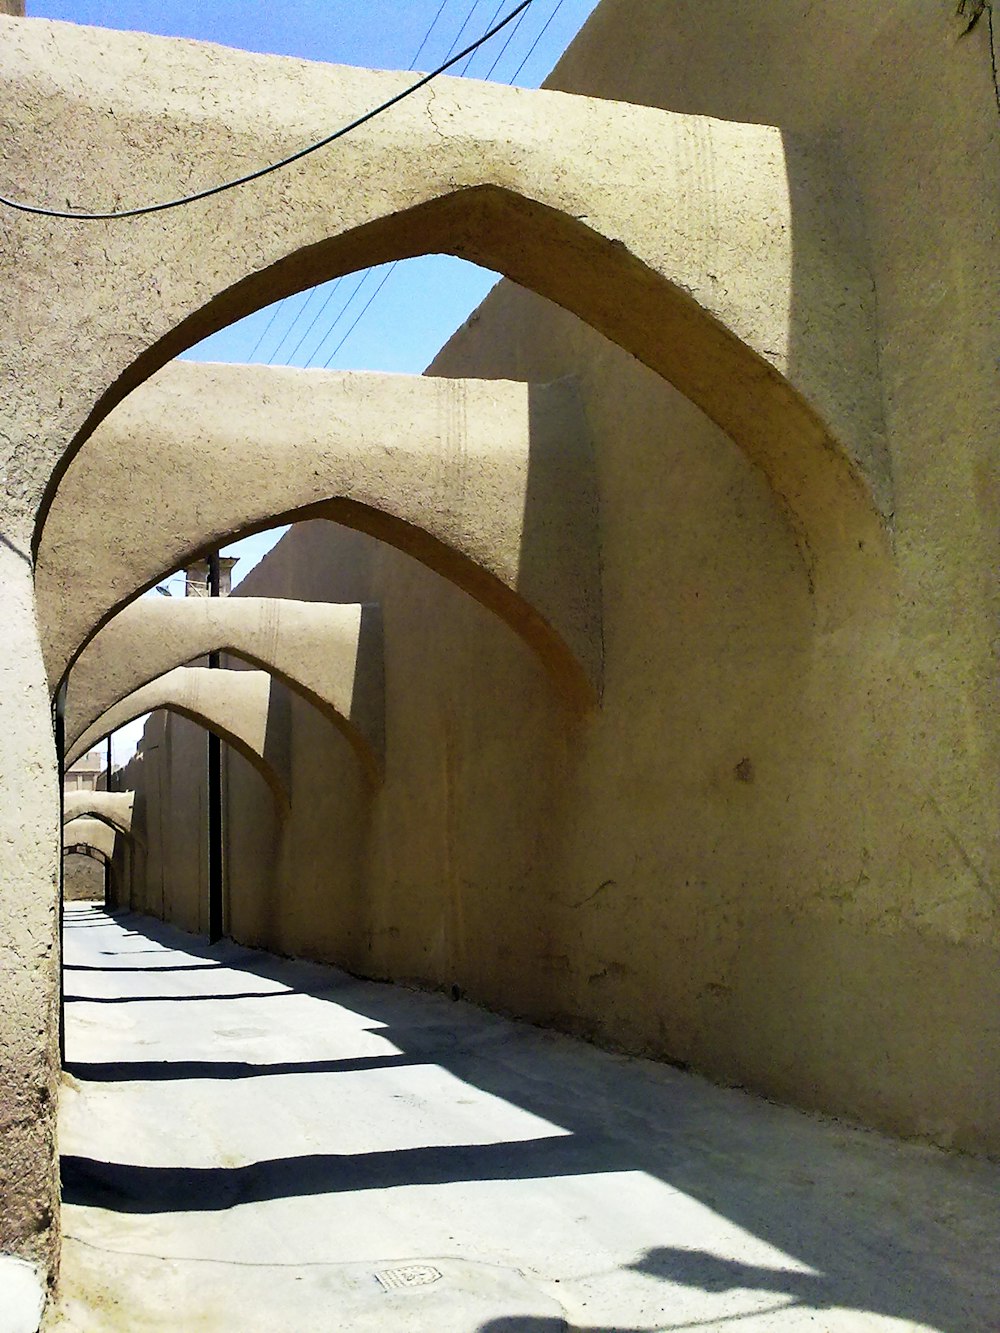 a street lined with arches and buildings under a blue sky